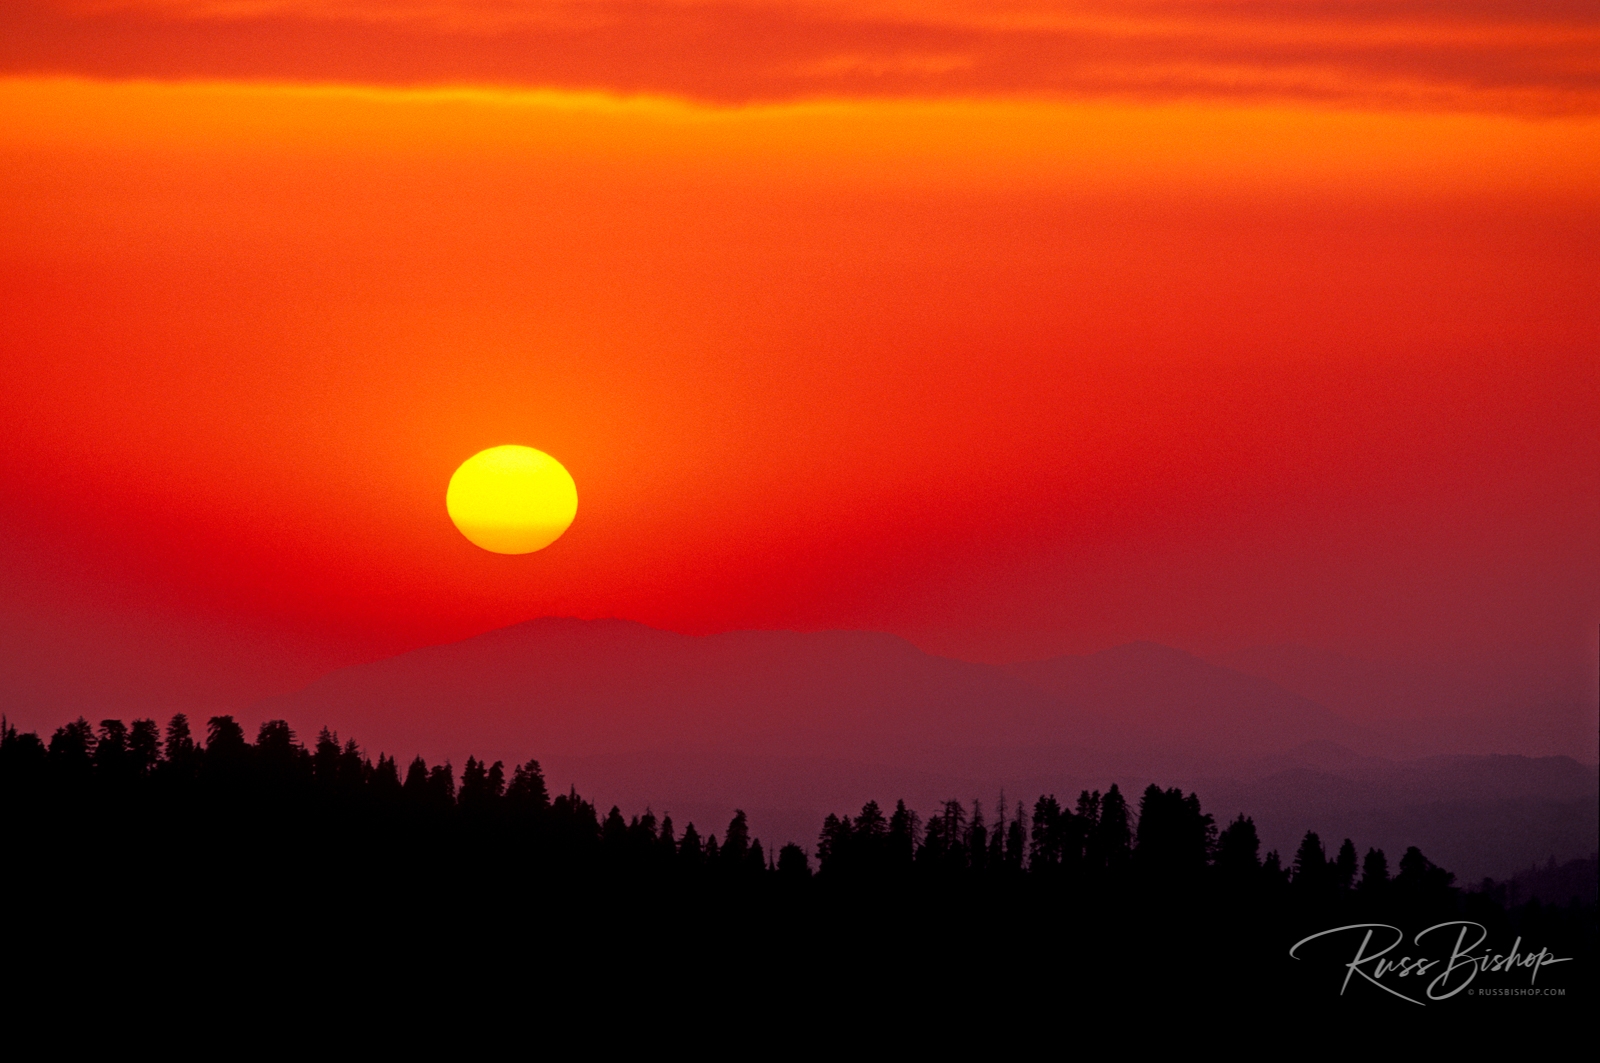 Welcome Summer Solstice! Sunset over the Sierra foothills from Moro Rock, Sequoia National Park, California